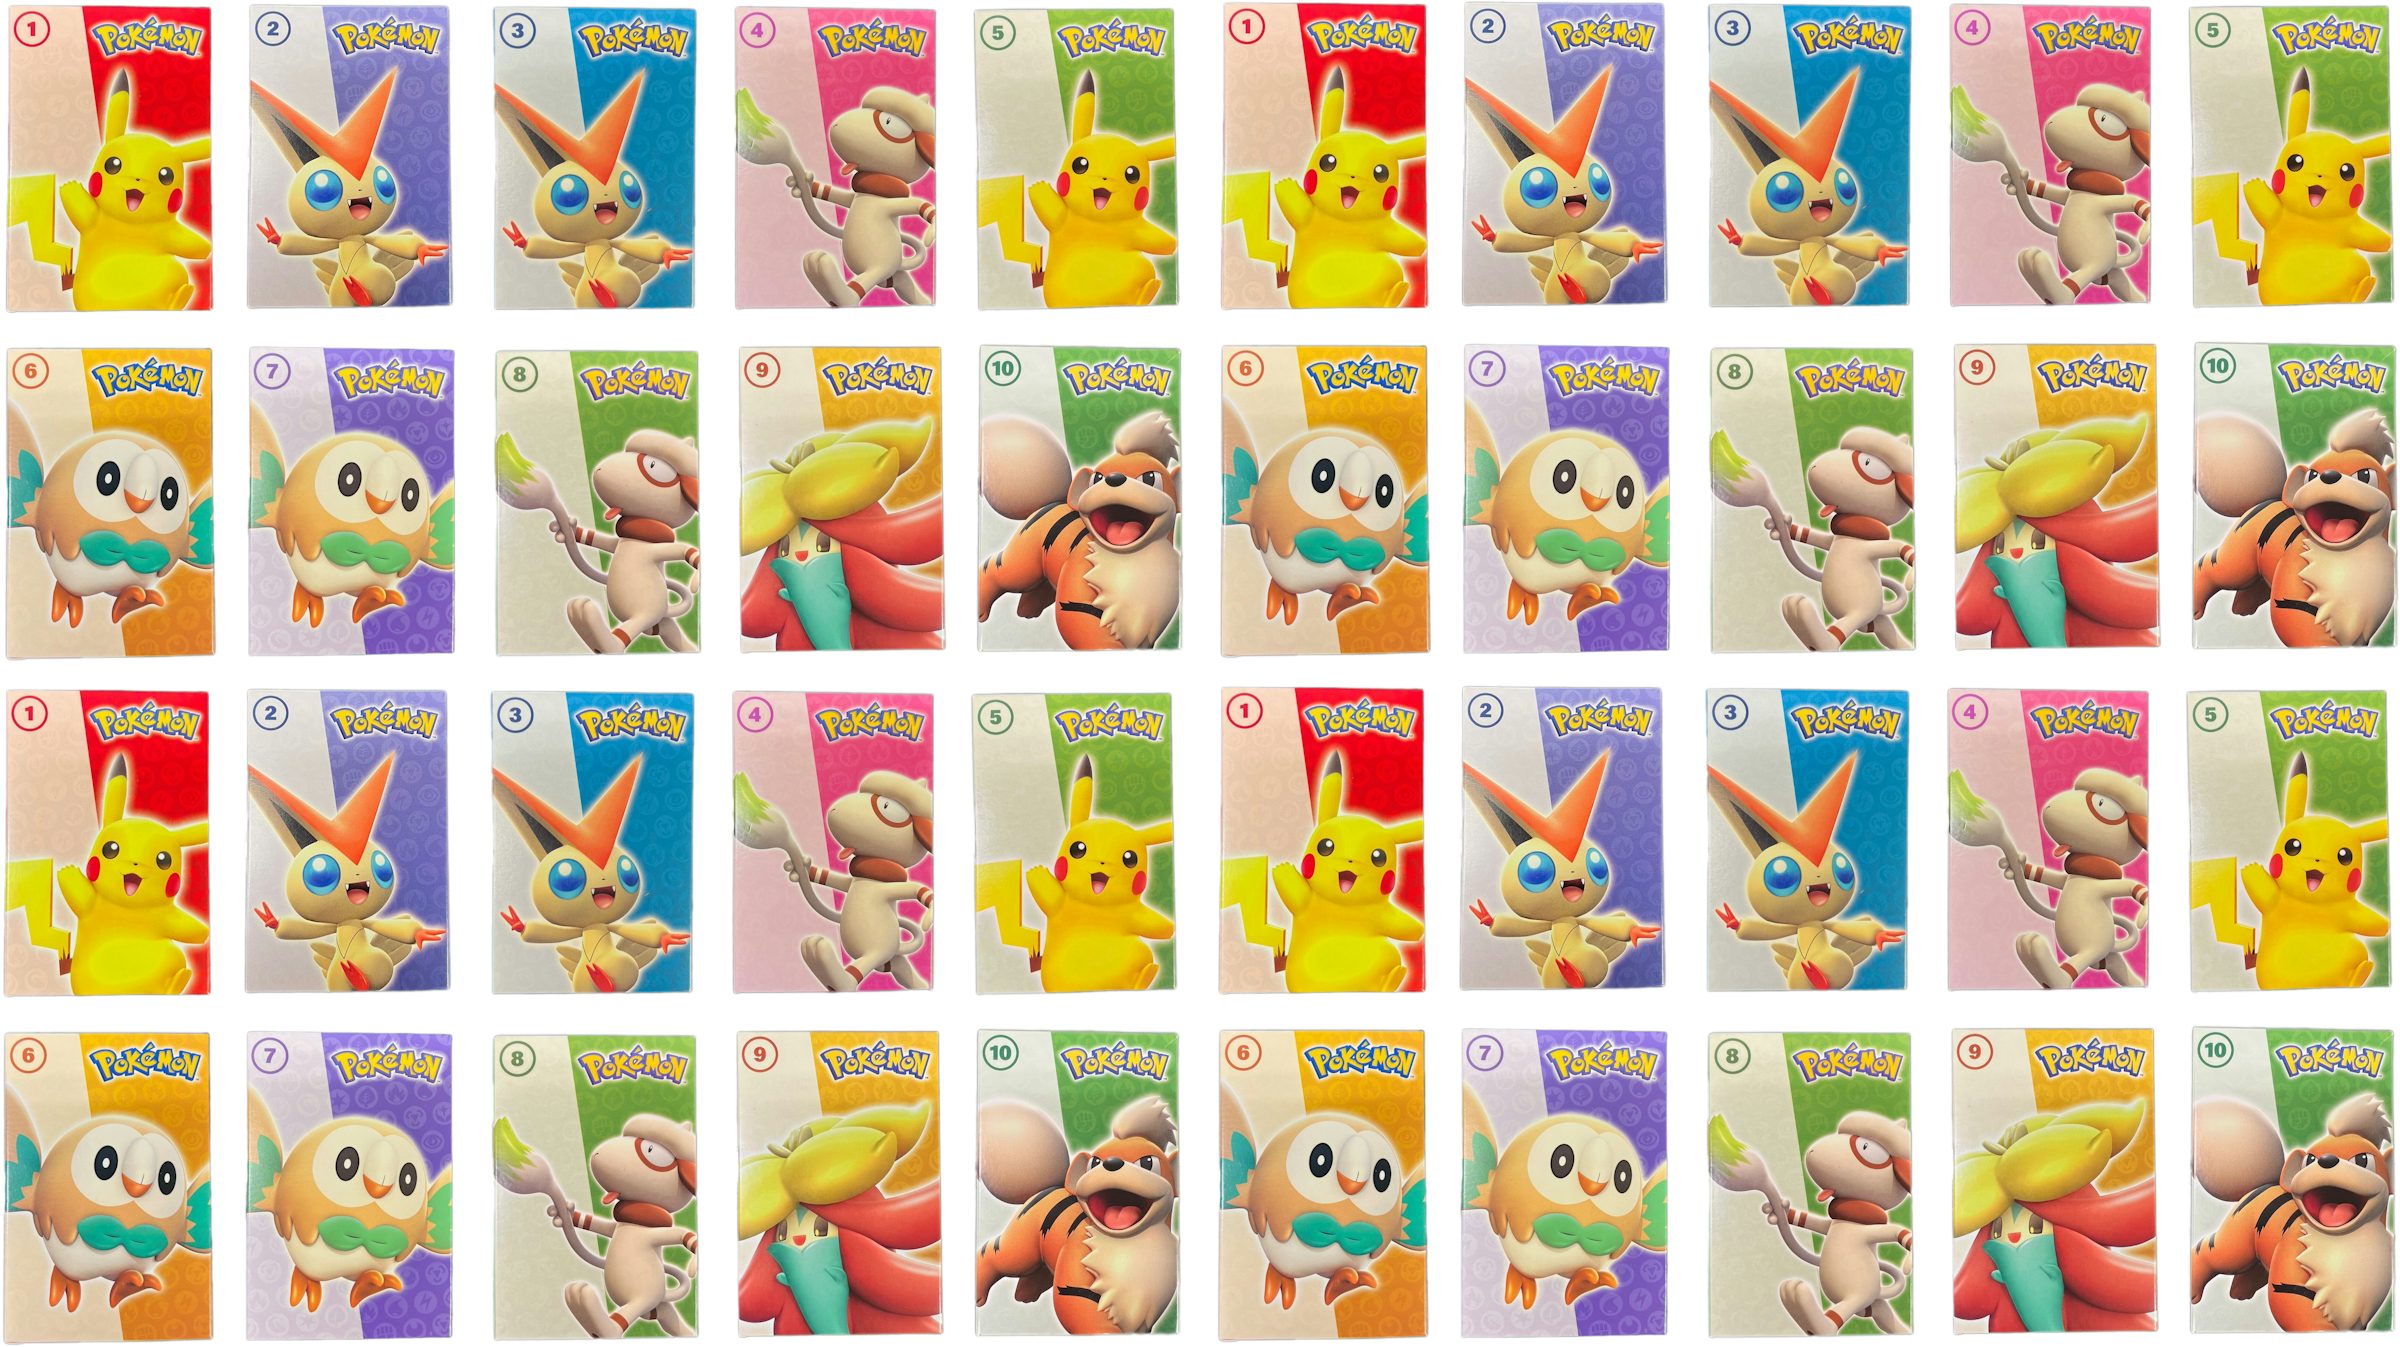 2022 McDONALD'S POKEMON - COMPLETE SET OF 15 CARDS - READY TO SHIP